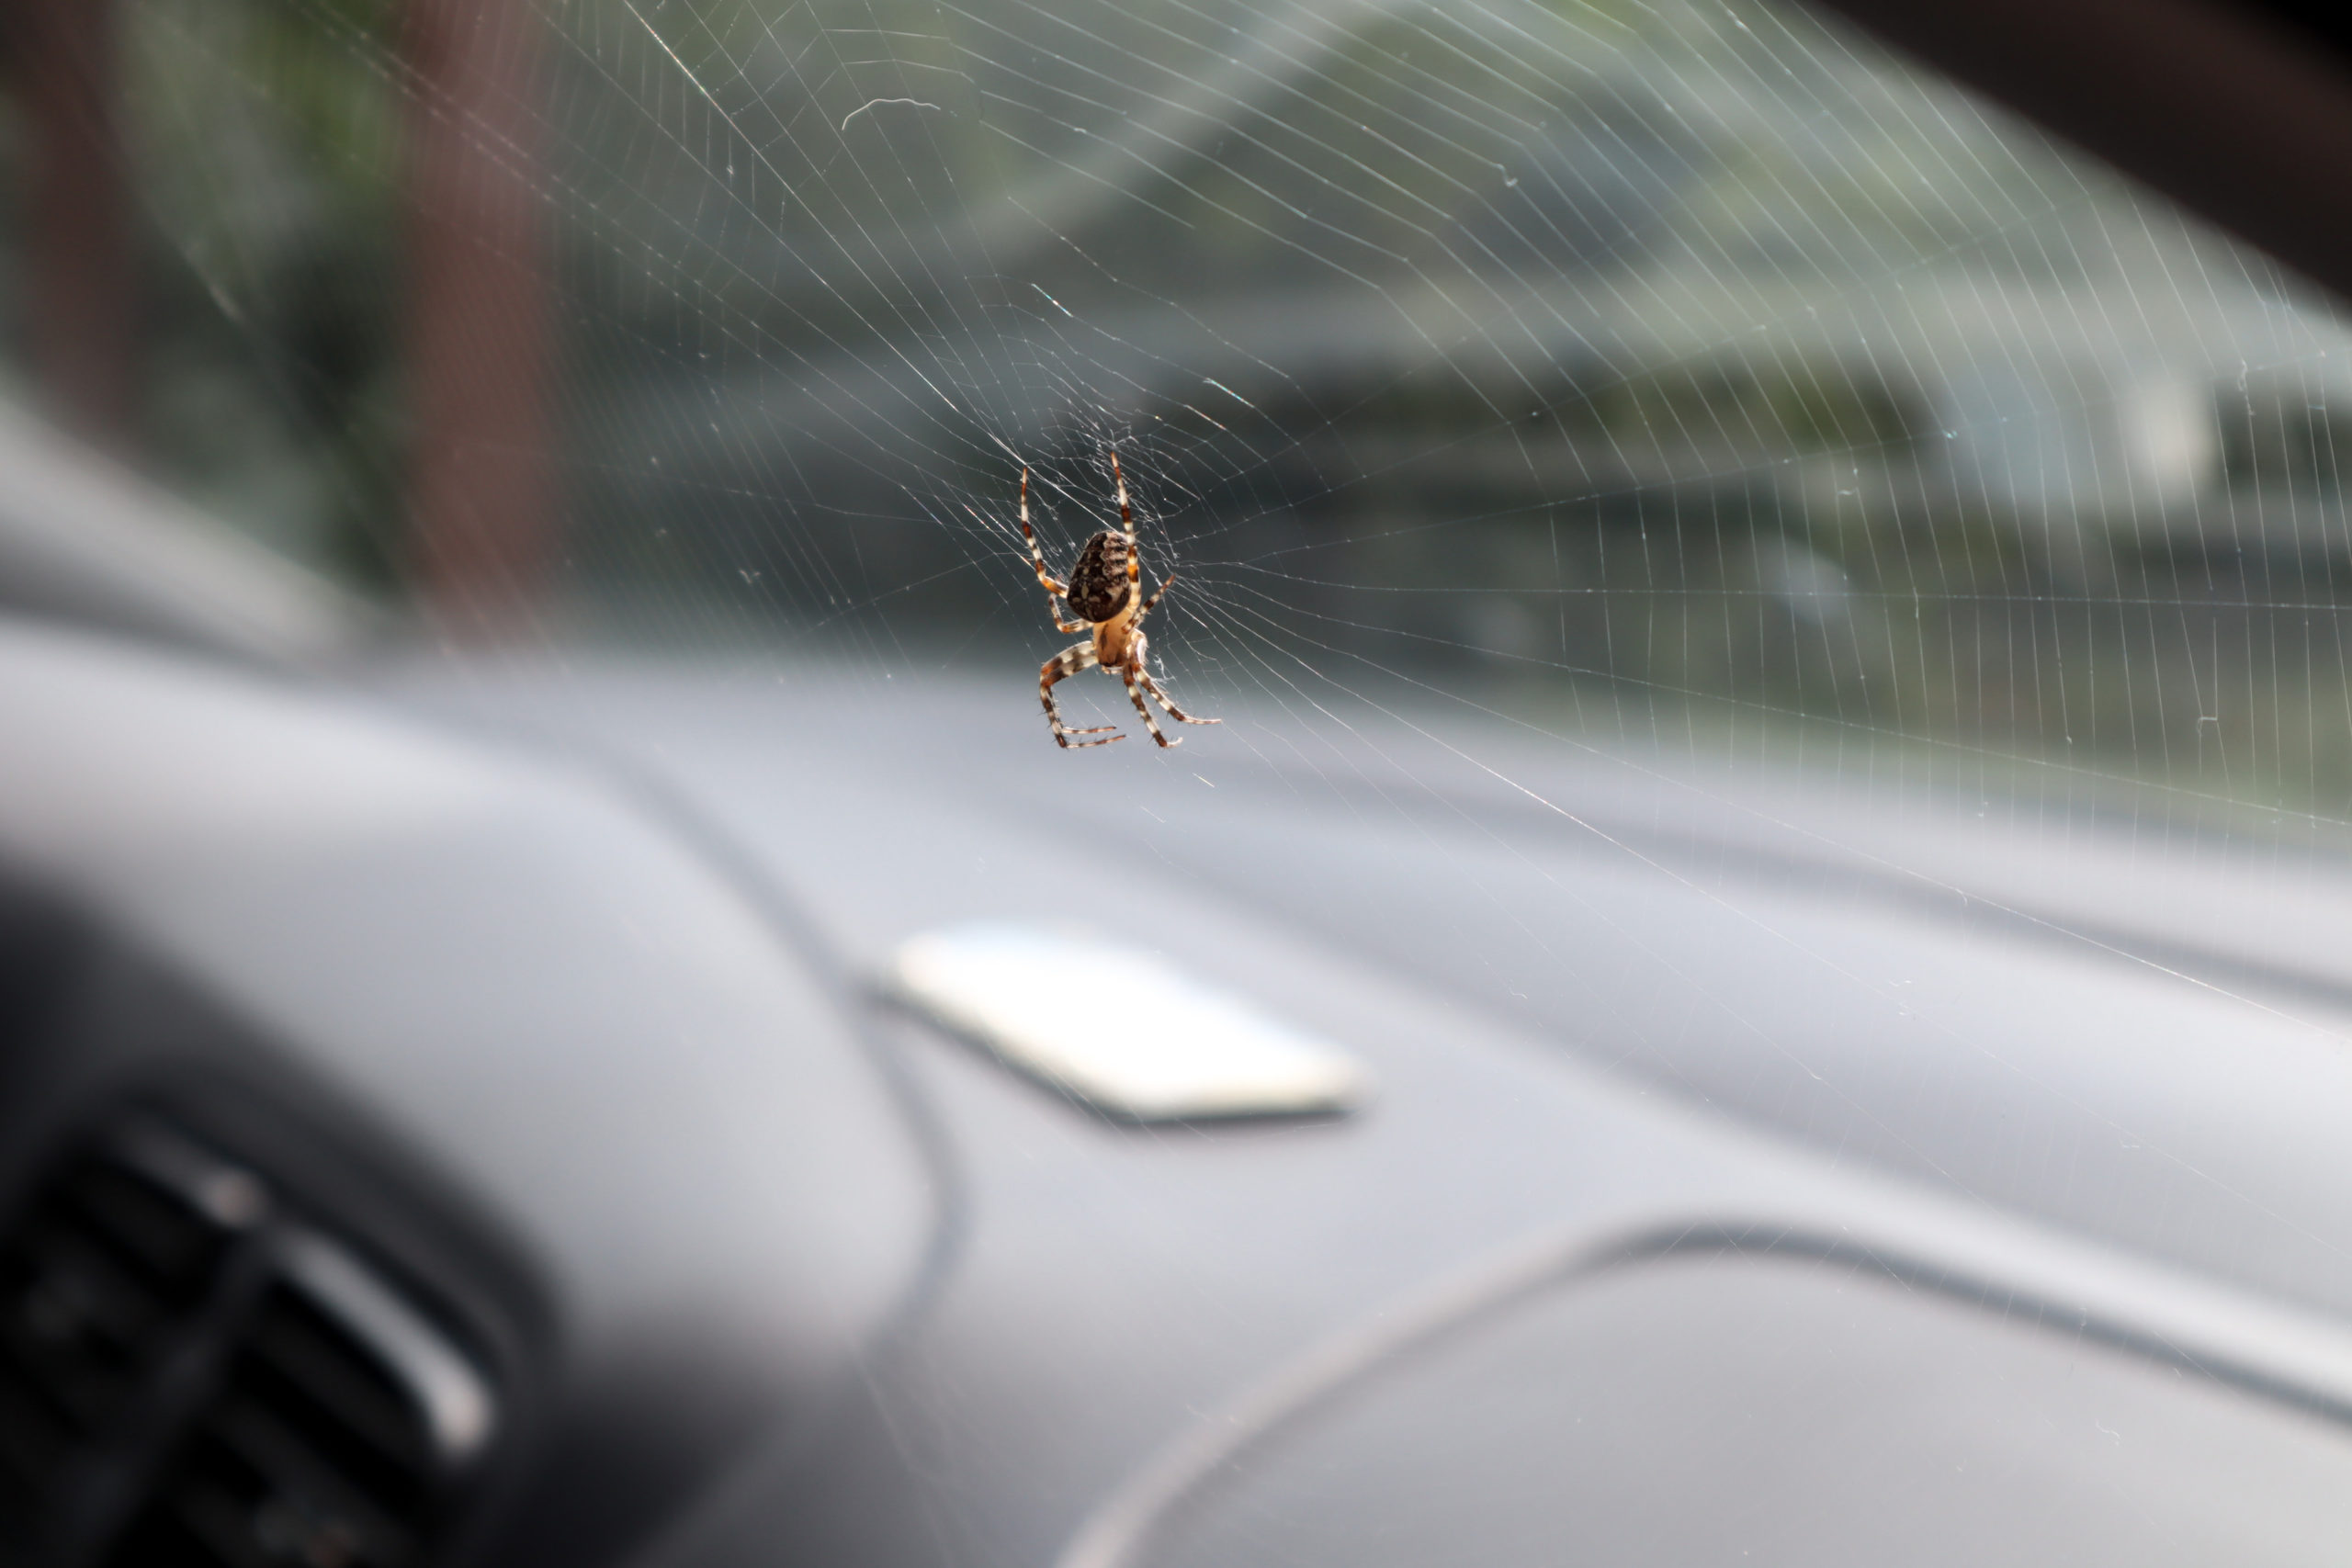 7 Steps on How to Get a Spider Out of a Car